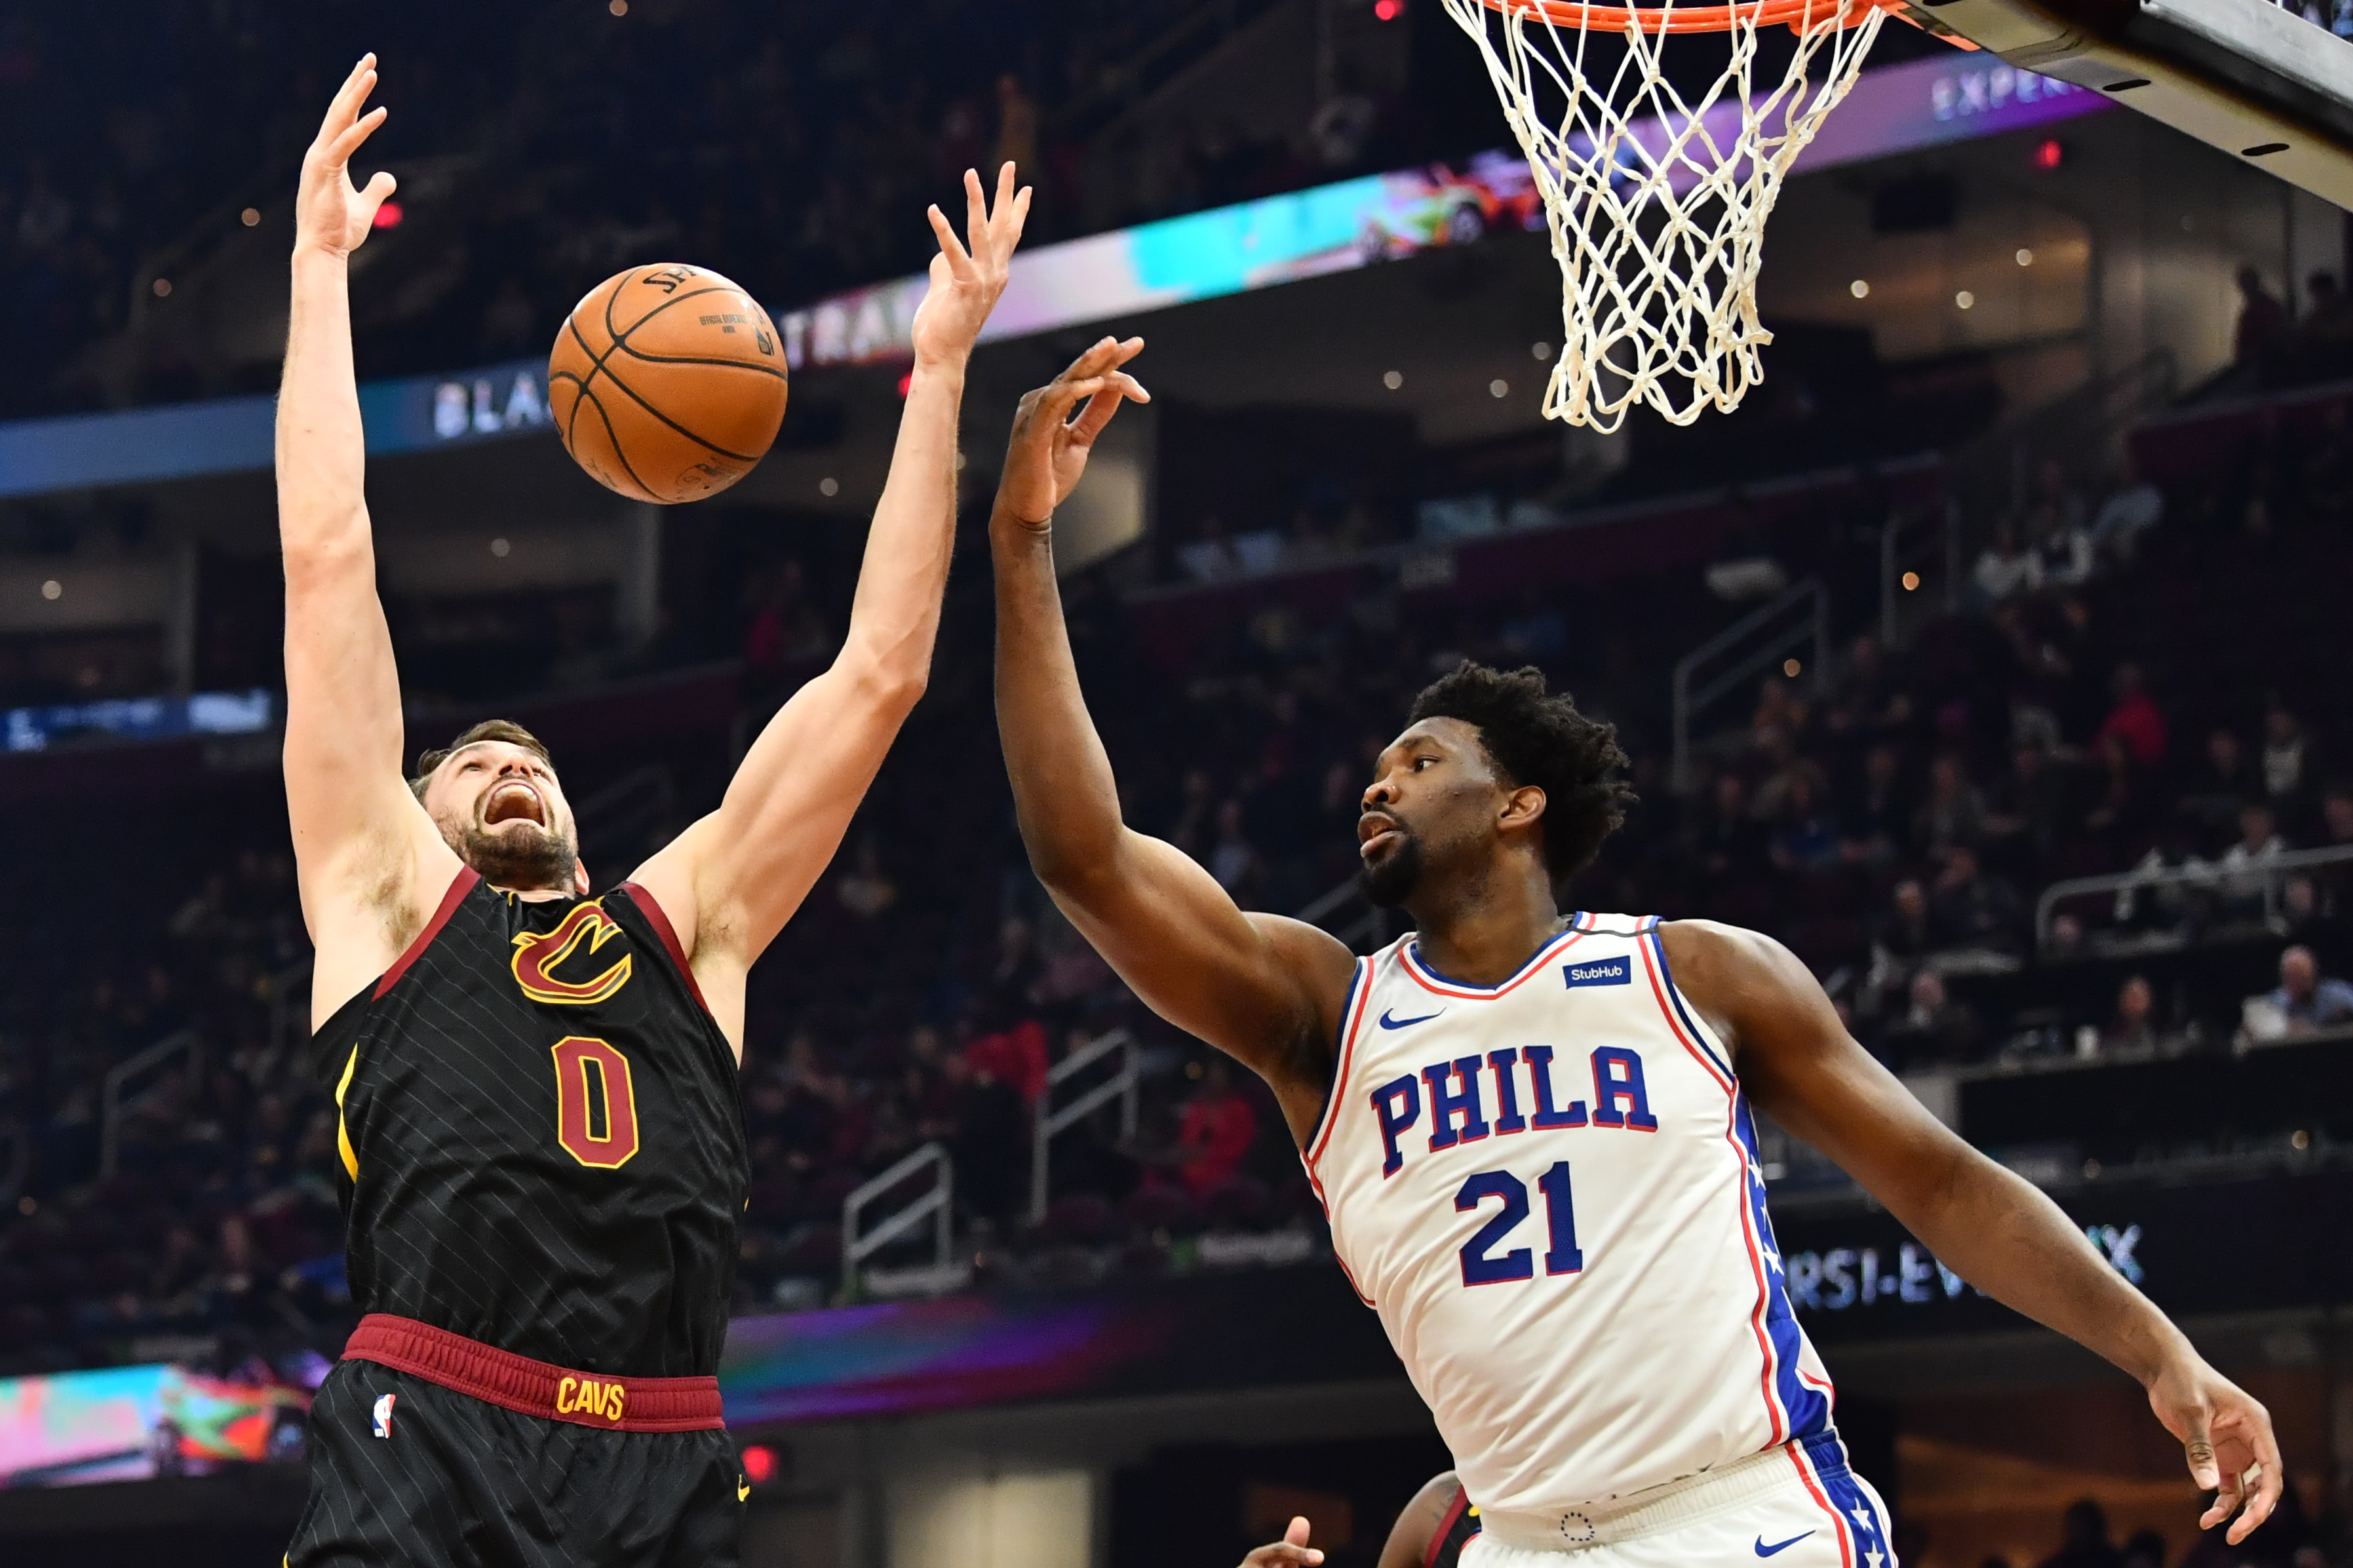 Cleveland Cavaliers forward Kevin Love goes for a rebound against Philadelphia 76ers center Joel Embiid during the first half at Rocket Mortgage FieldHouse.&nbsp;